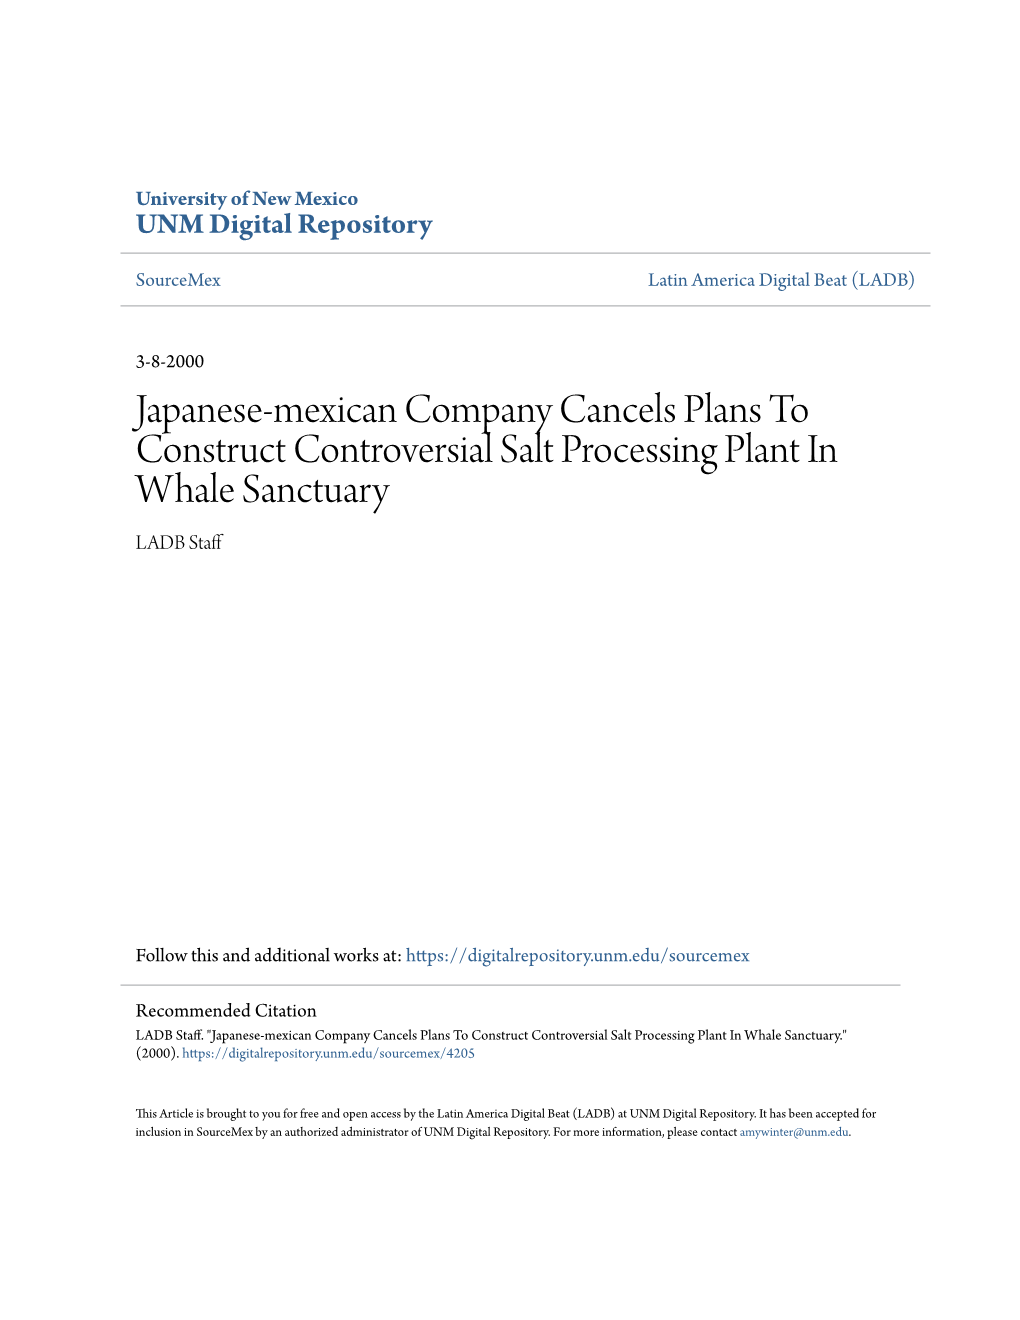 Japanese-Mexican Company Cancels Plans to Construct Controversial Salt Processing Plant in Whale Sanctuary LADB Staff